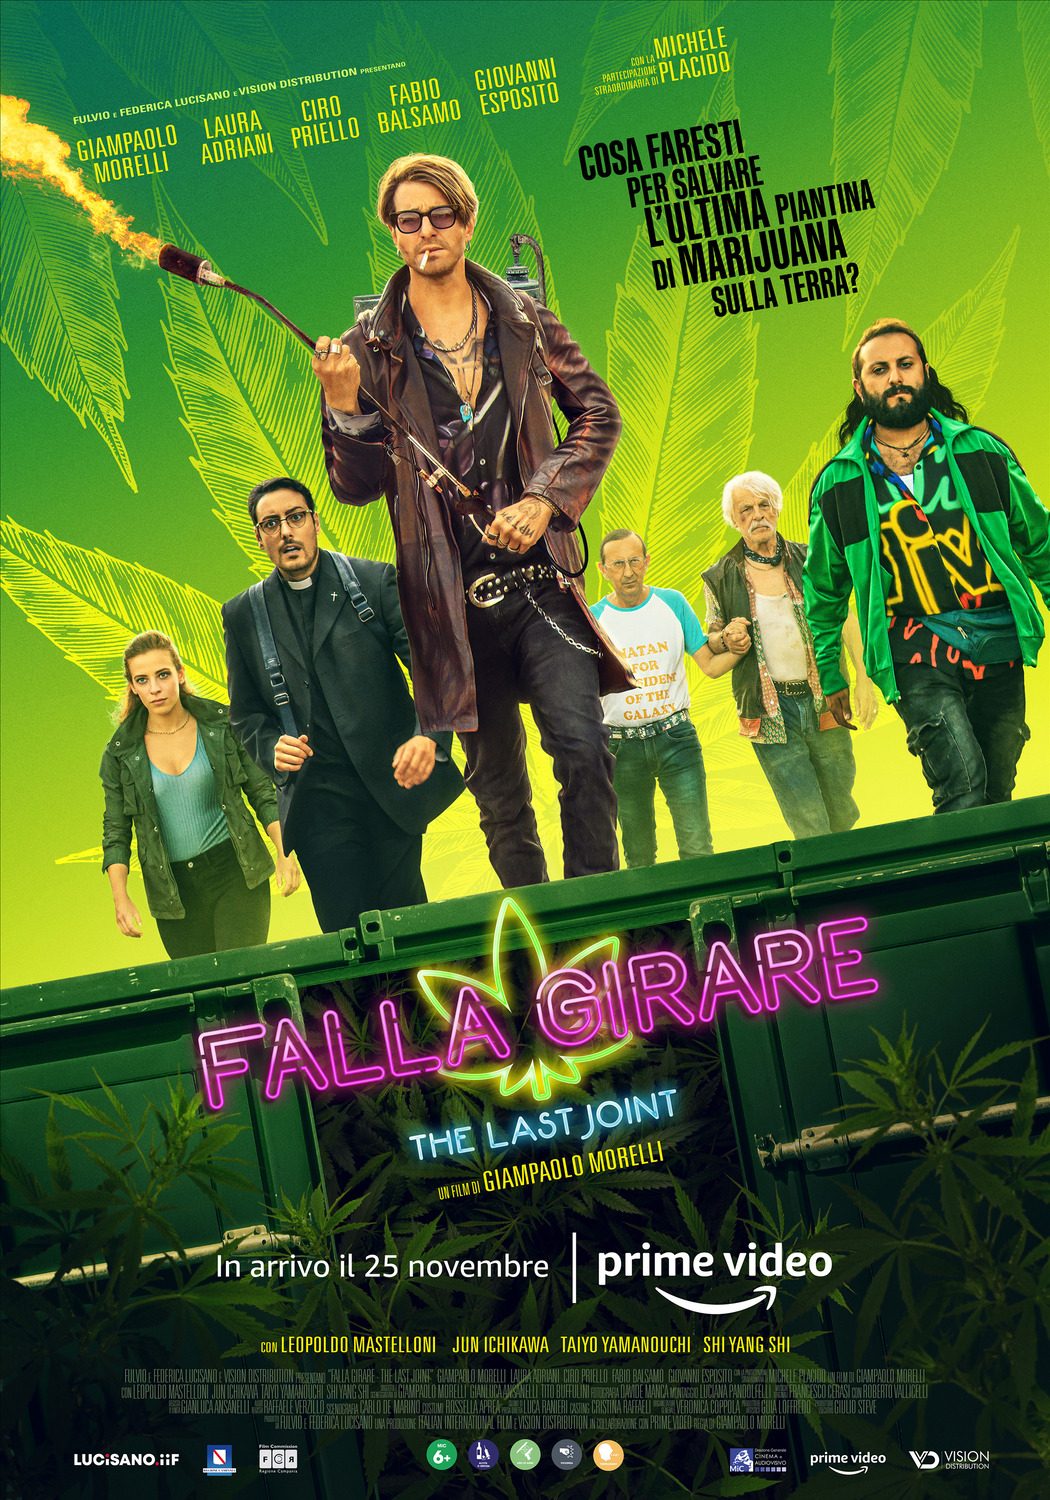 Extra Large Movie Poster Image for Falla girare 